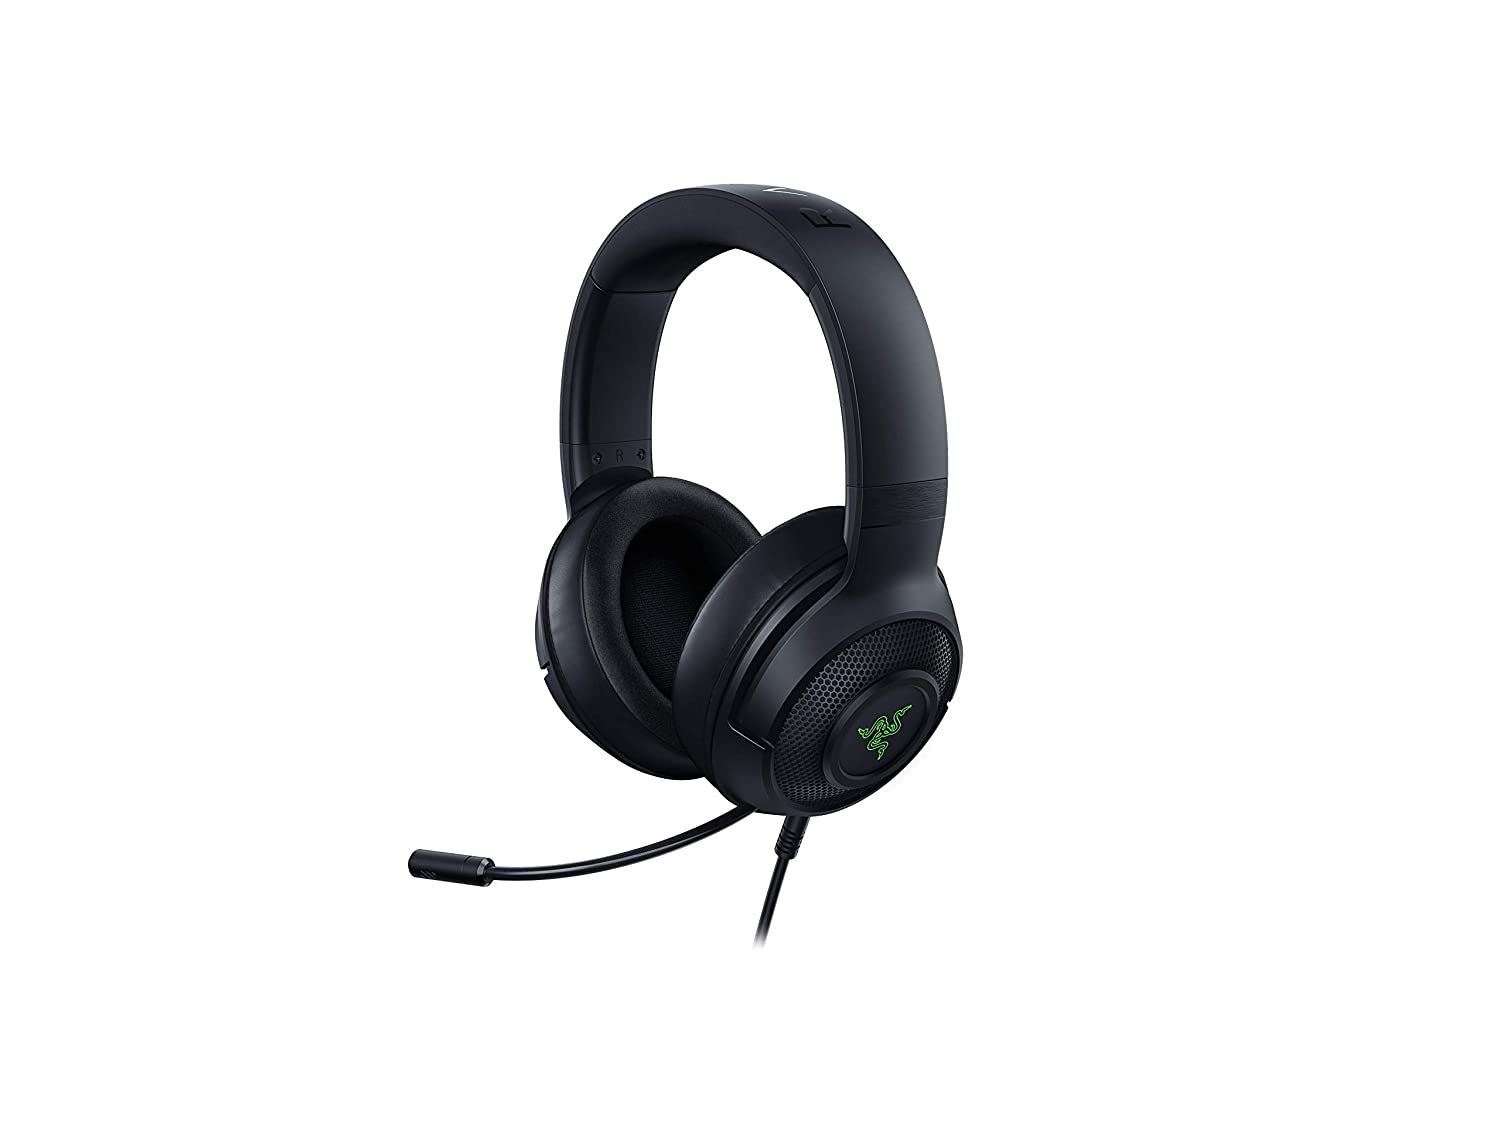 Razer Kraken V3 X Wired Gaming On Ear Headset 7.1 Surround Sound Triforce 40mm Drivers HyperClear Bendable Cardioid Mic RZ04-03750100-R3U1-Headsets-RAZER-computerspace